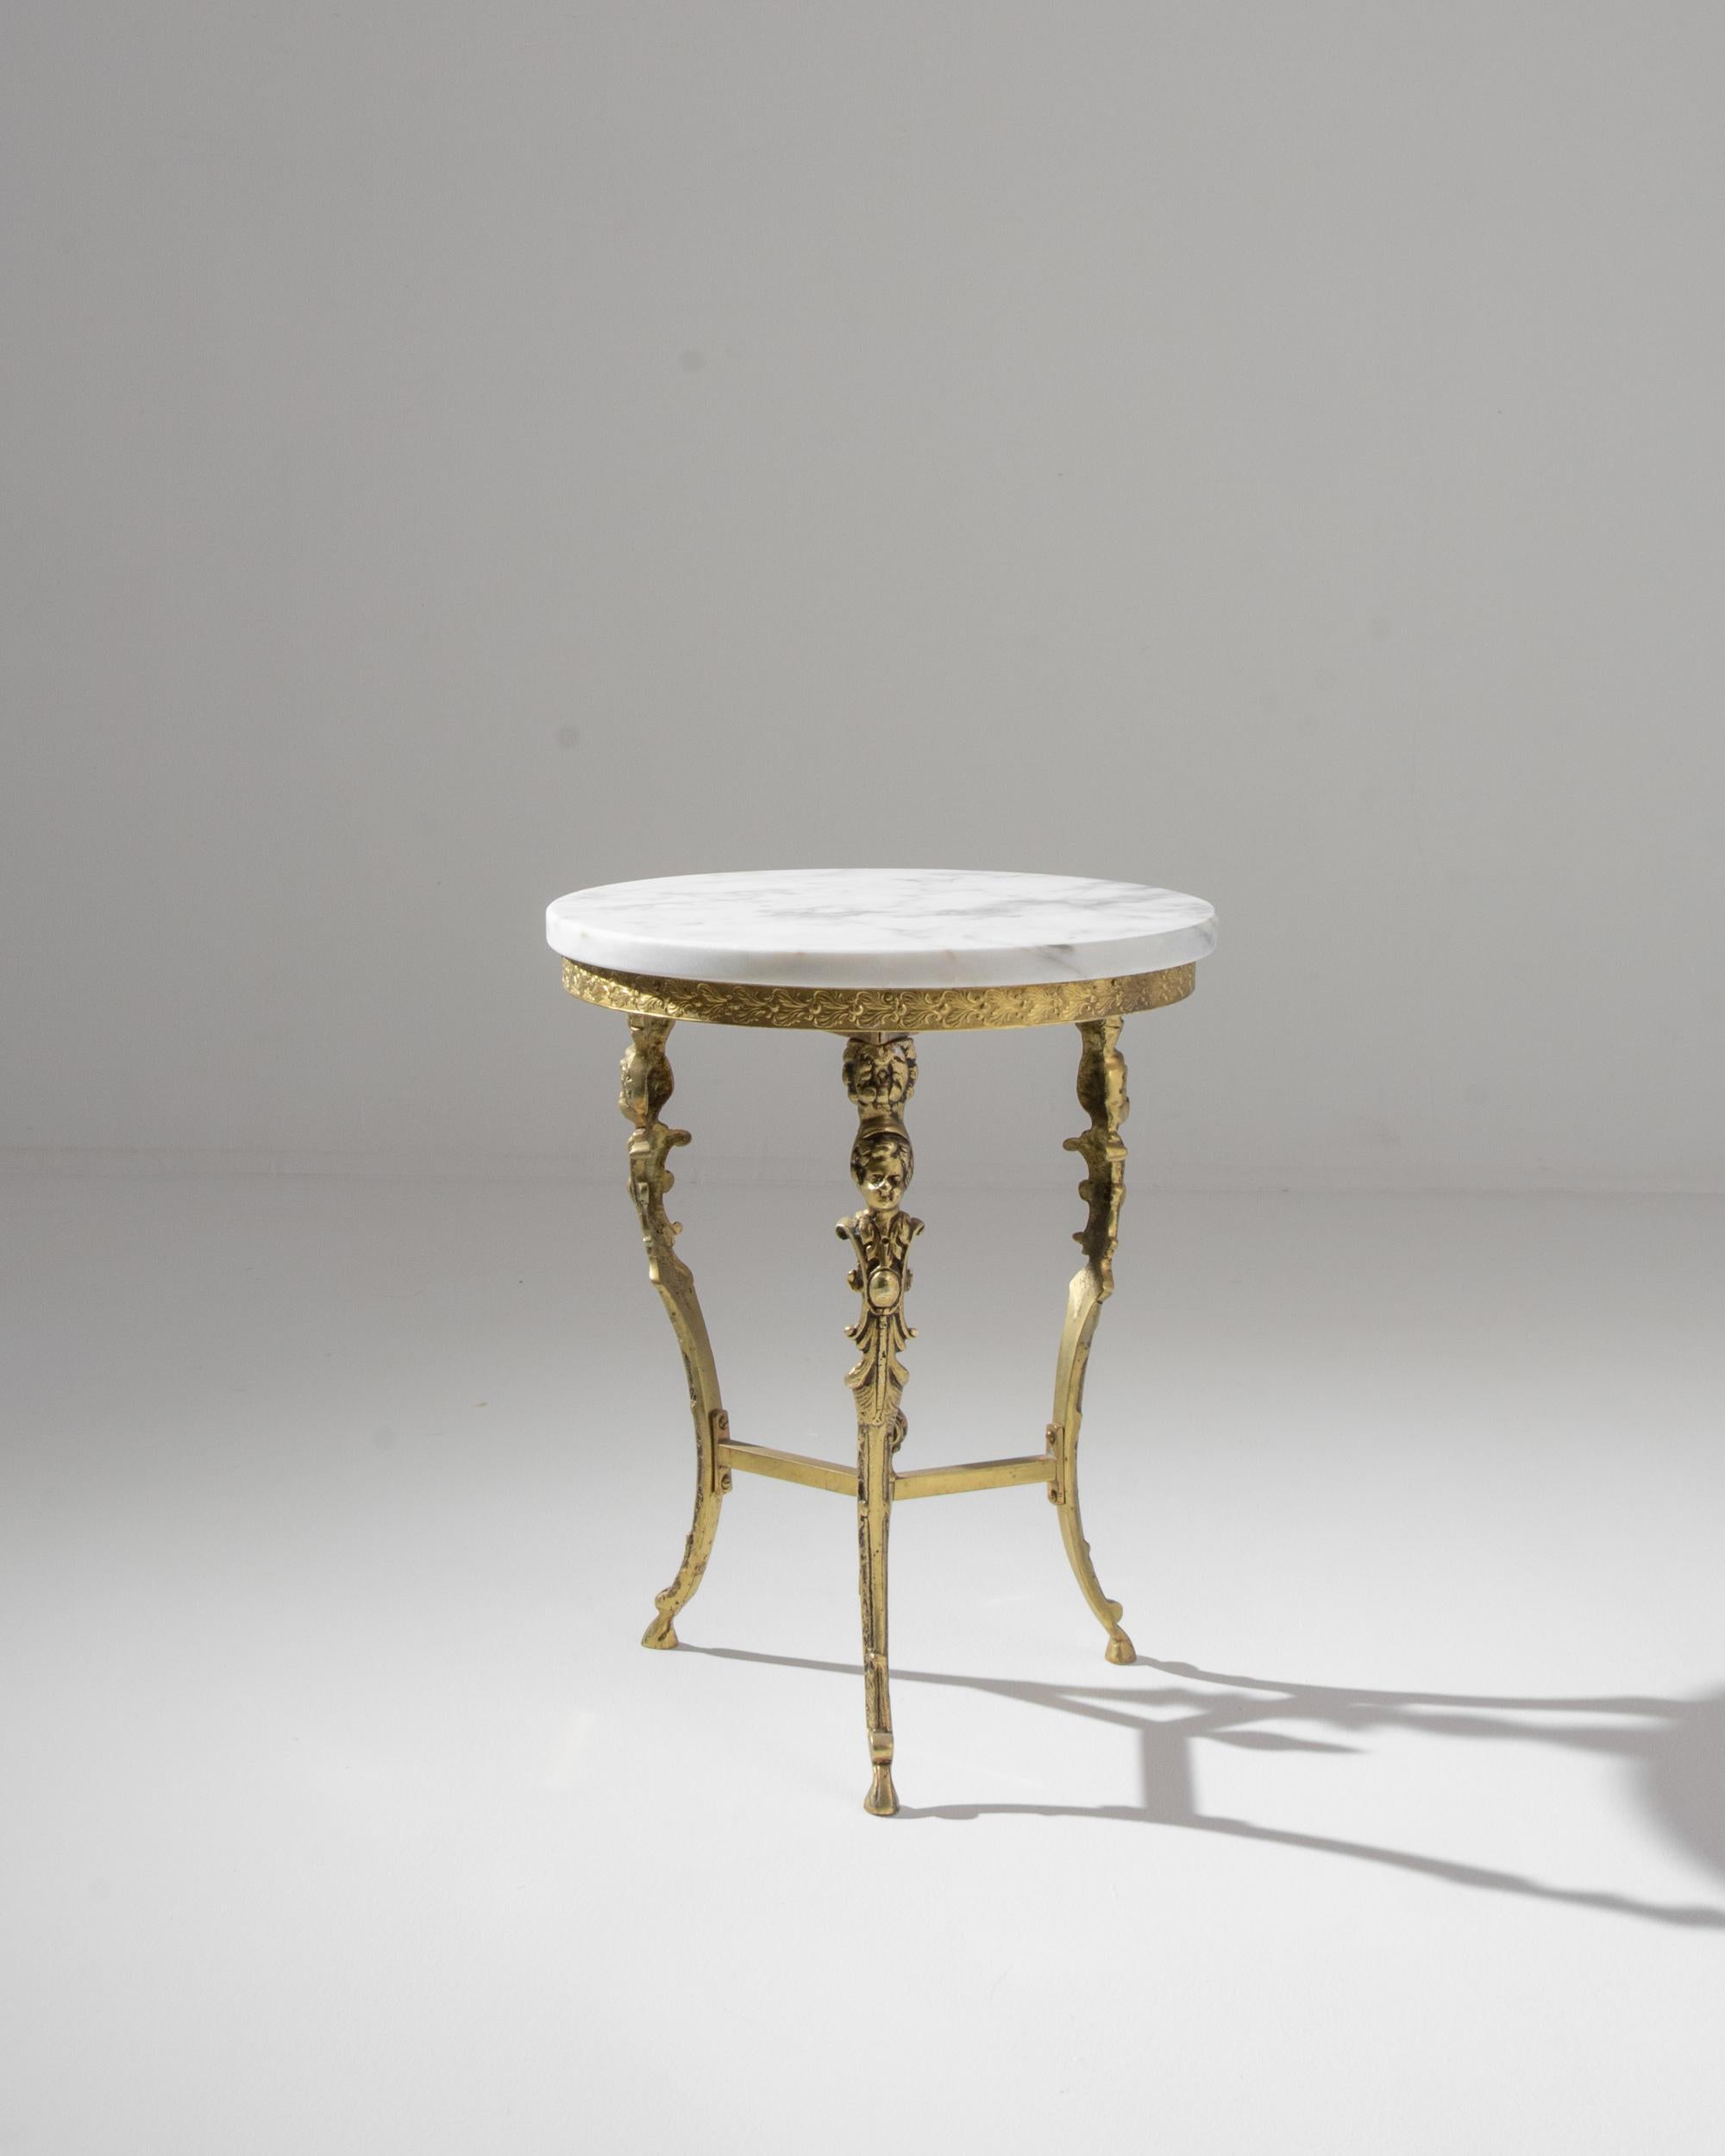 Ornate and light-footed, this vintage brass table conjures the elegance of an earlier age. Made in France in the 20th century, a circular tabletop of pale white marble sits atop a gilded base; dainty hoofed feet create a sprightly posture. The legs